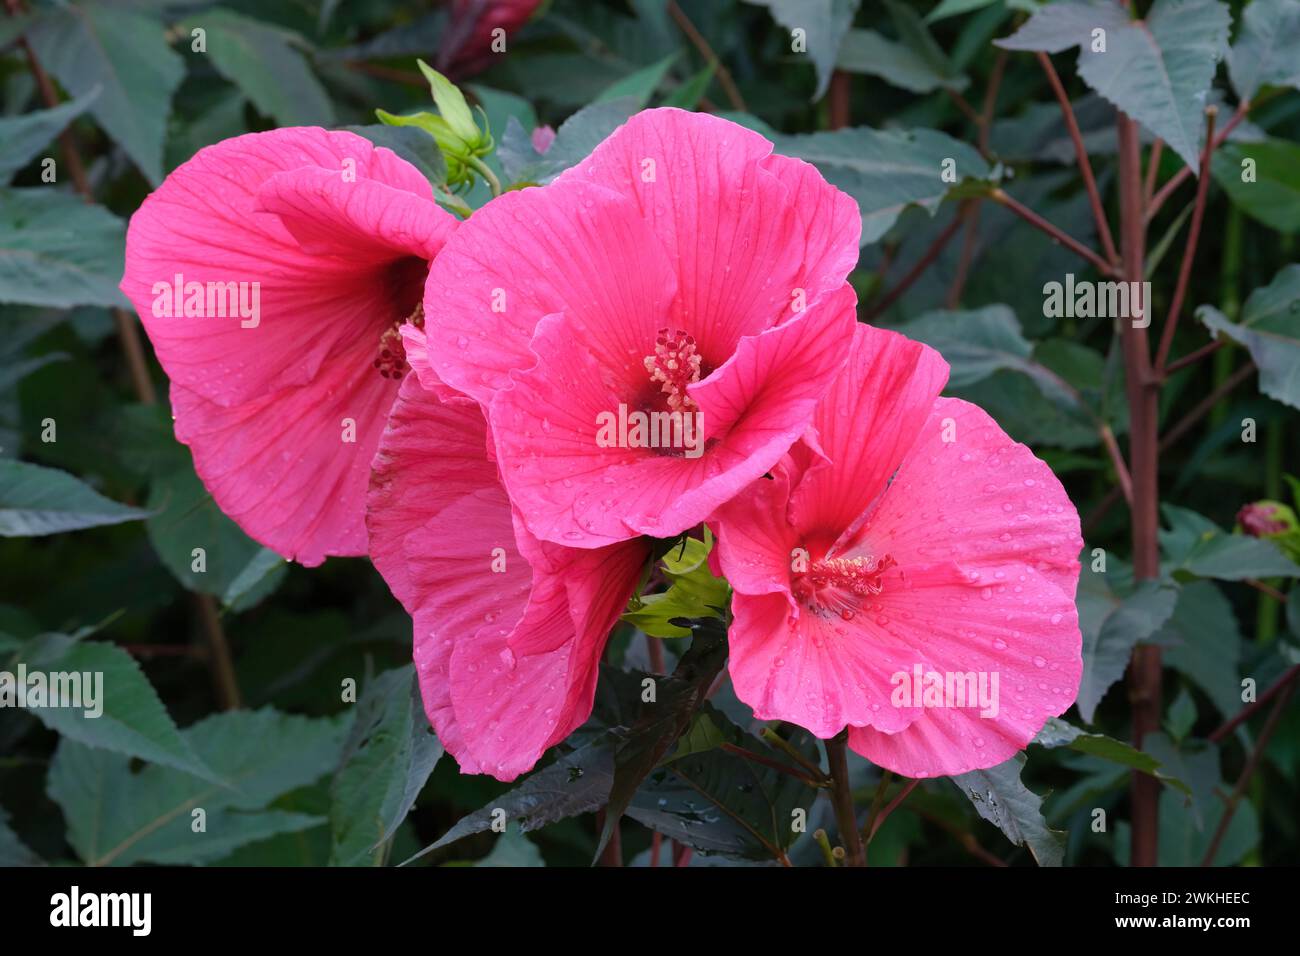 Hibiscus moscheutos Planet Griotte, rose mallow Planet Griotte, Hibiscus moscheutos Tangri, large cherry-red flowers Stock Photo